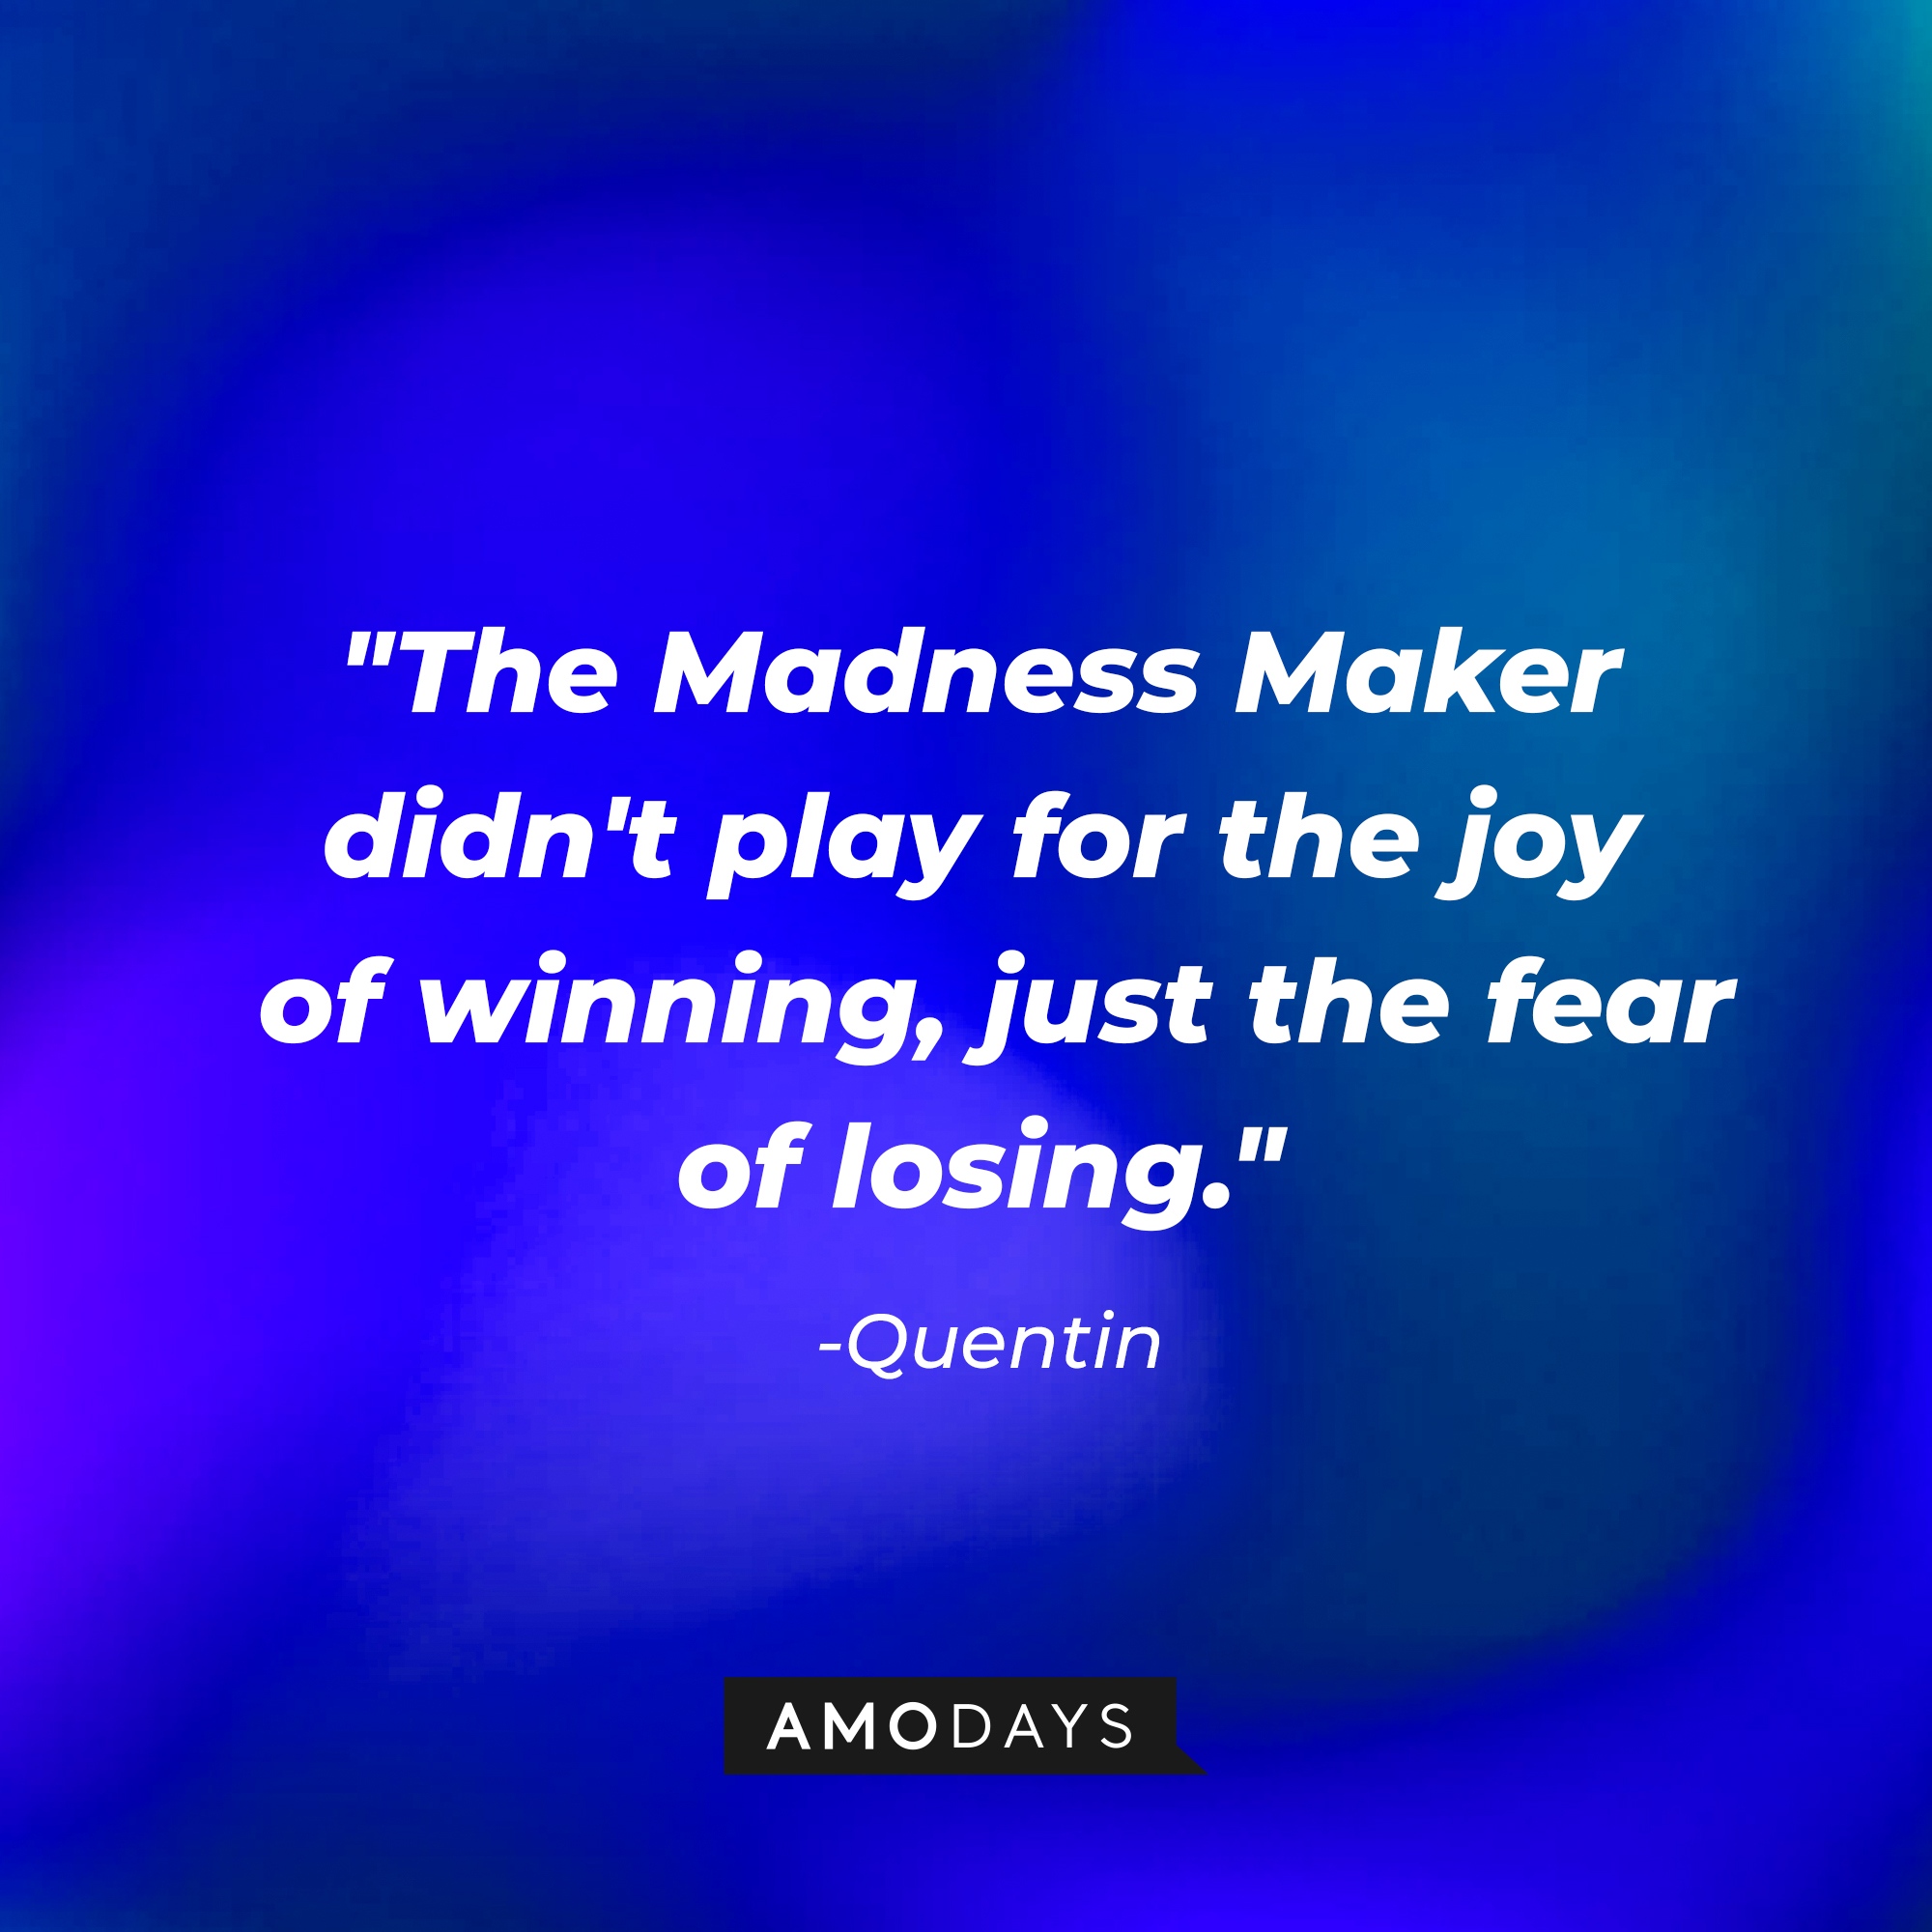 Quentin’s quotes: "The Madness Maker didn't play for the joy of winning, just the fear of losing| Source: AmoDays